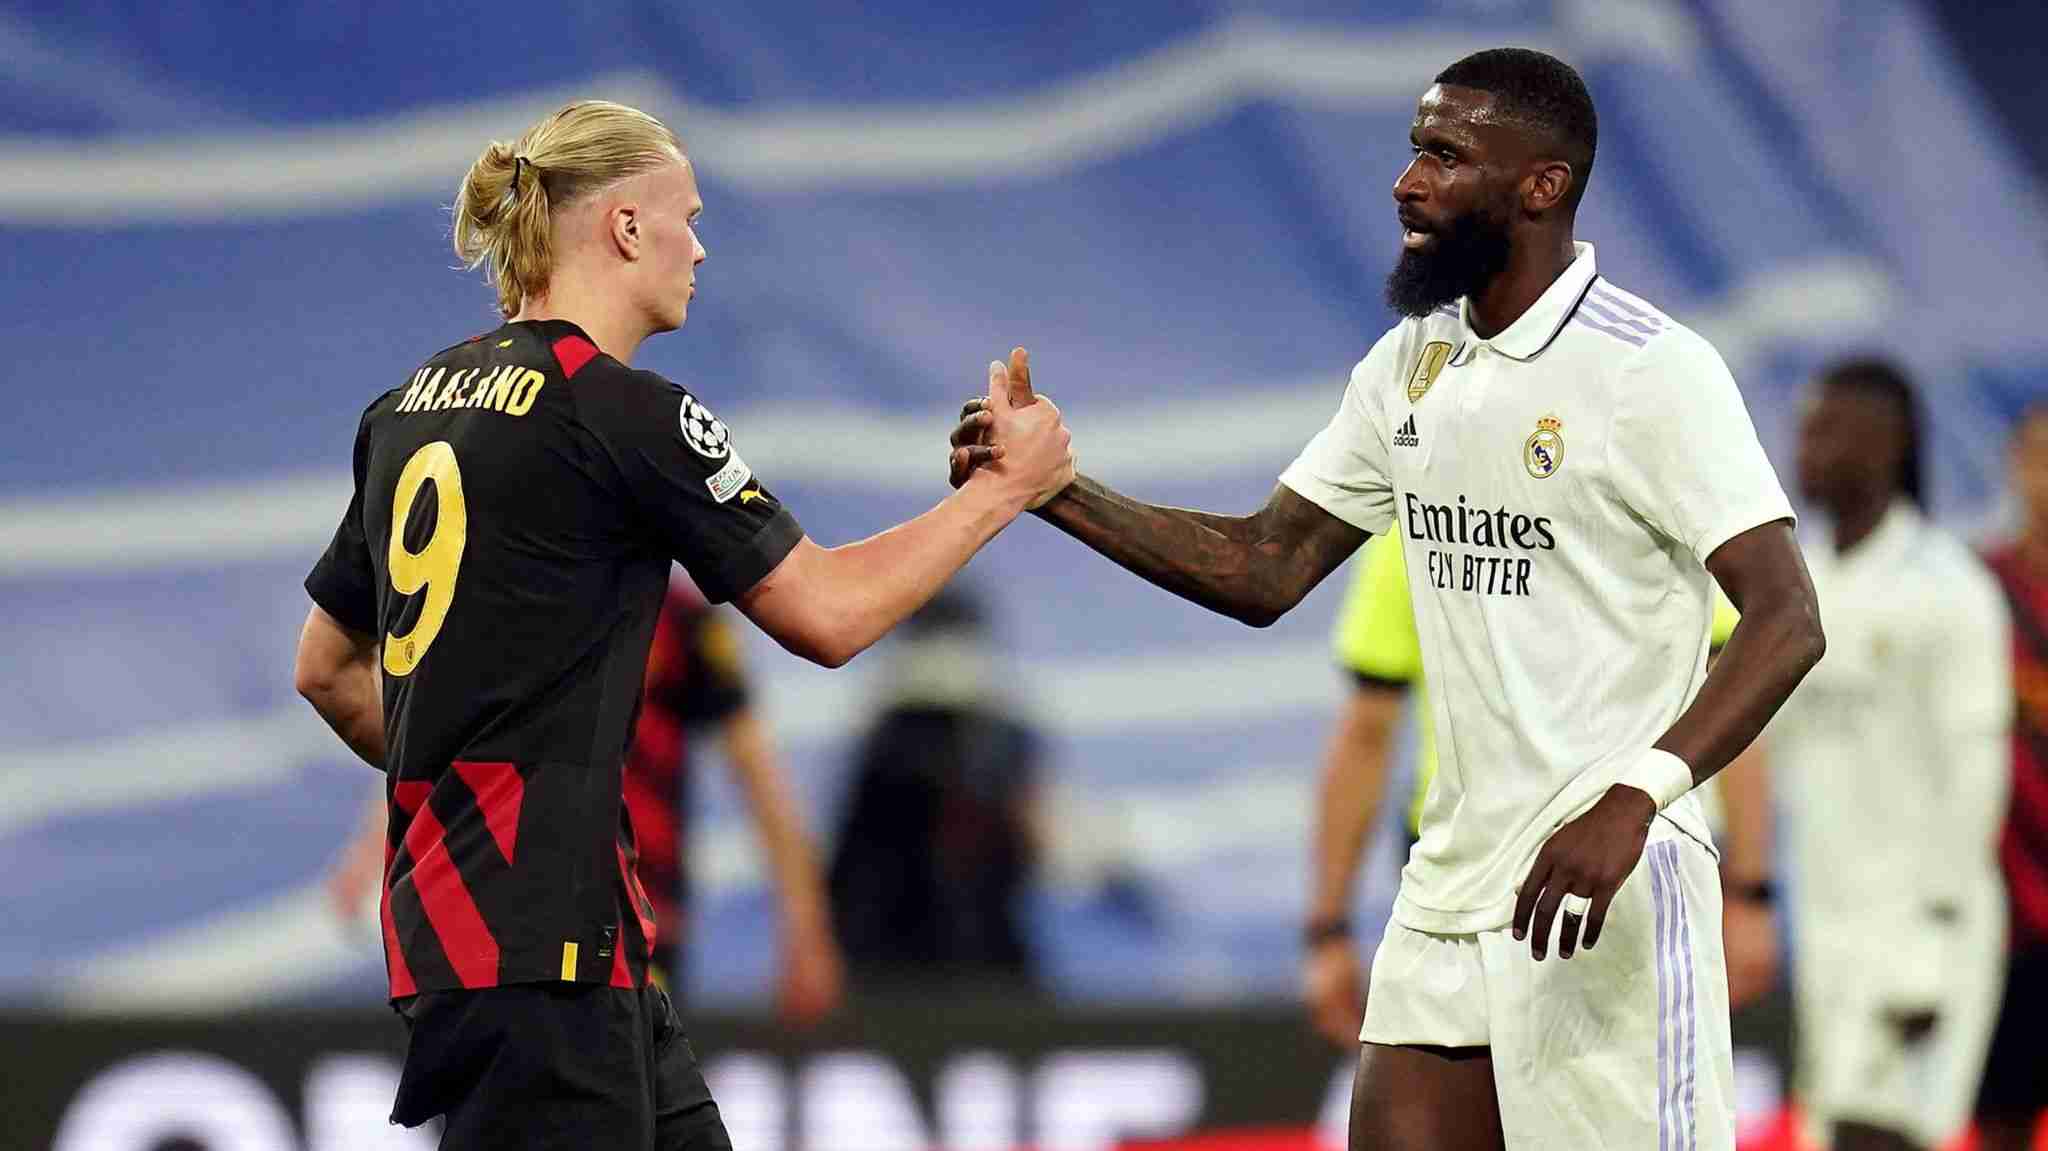 Antonio Rudiger issues stern warning to Erling Haaland ahead of Real Madrid vs Man City clash: “It’s personal”